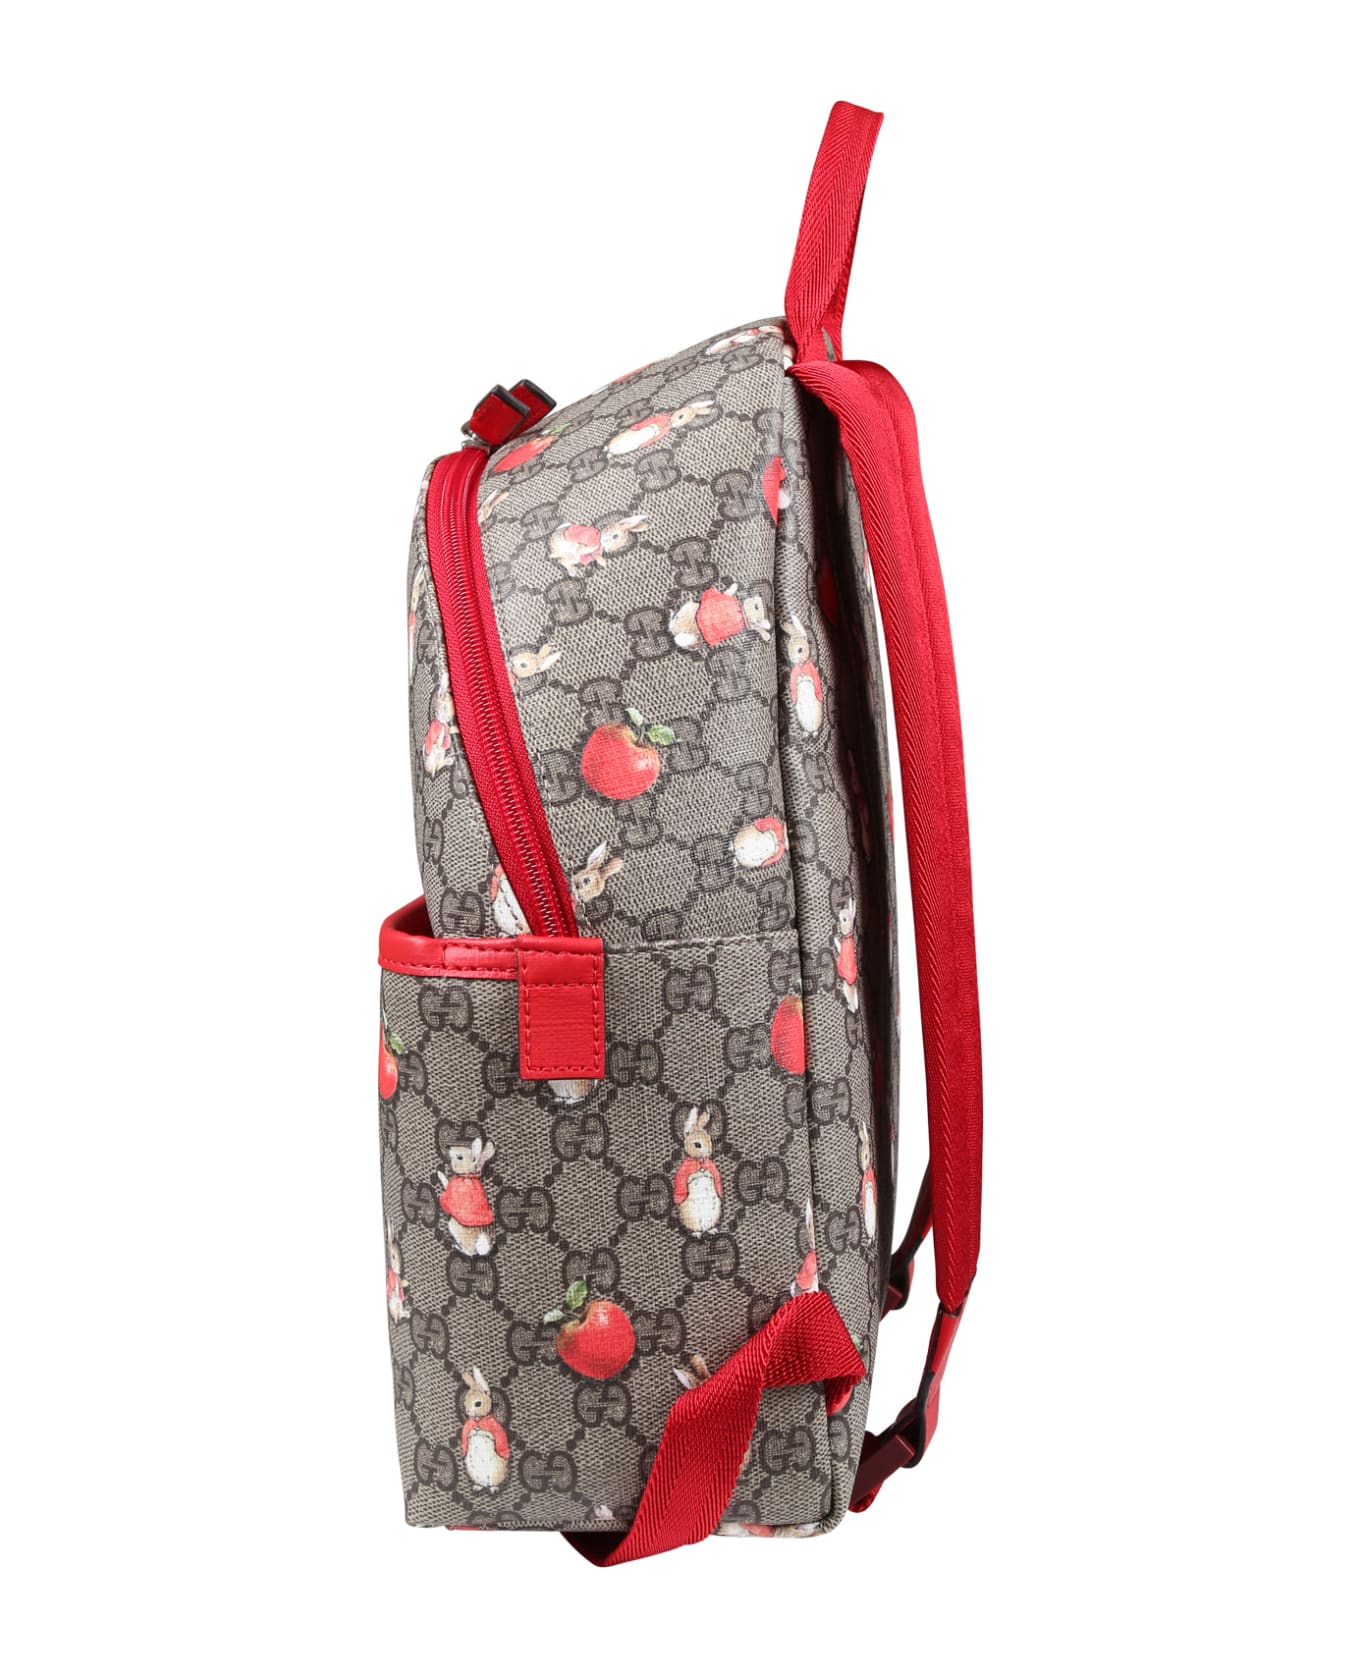 Gucci Brown Backpack For Girl With Print - Brown